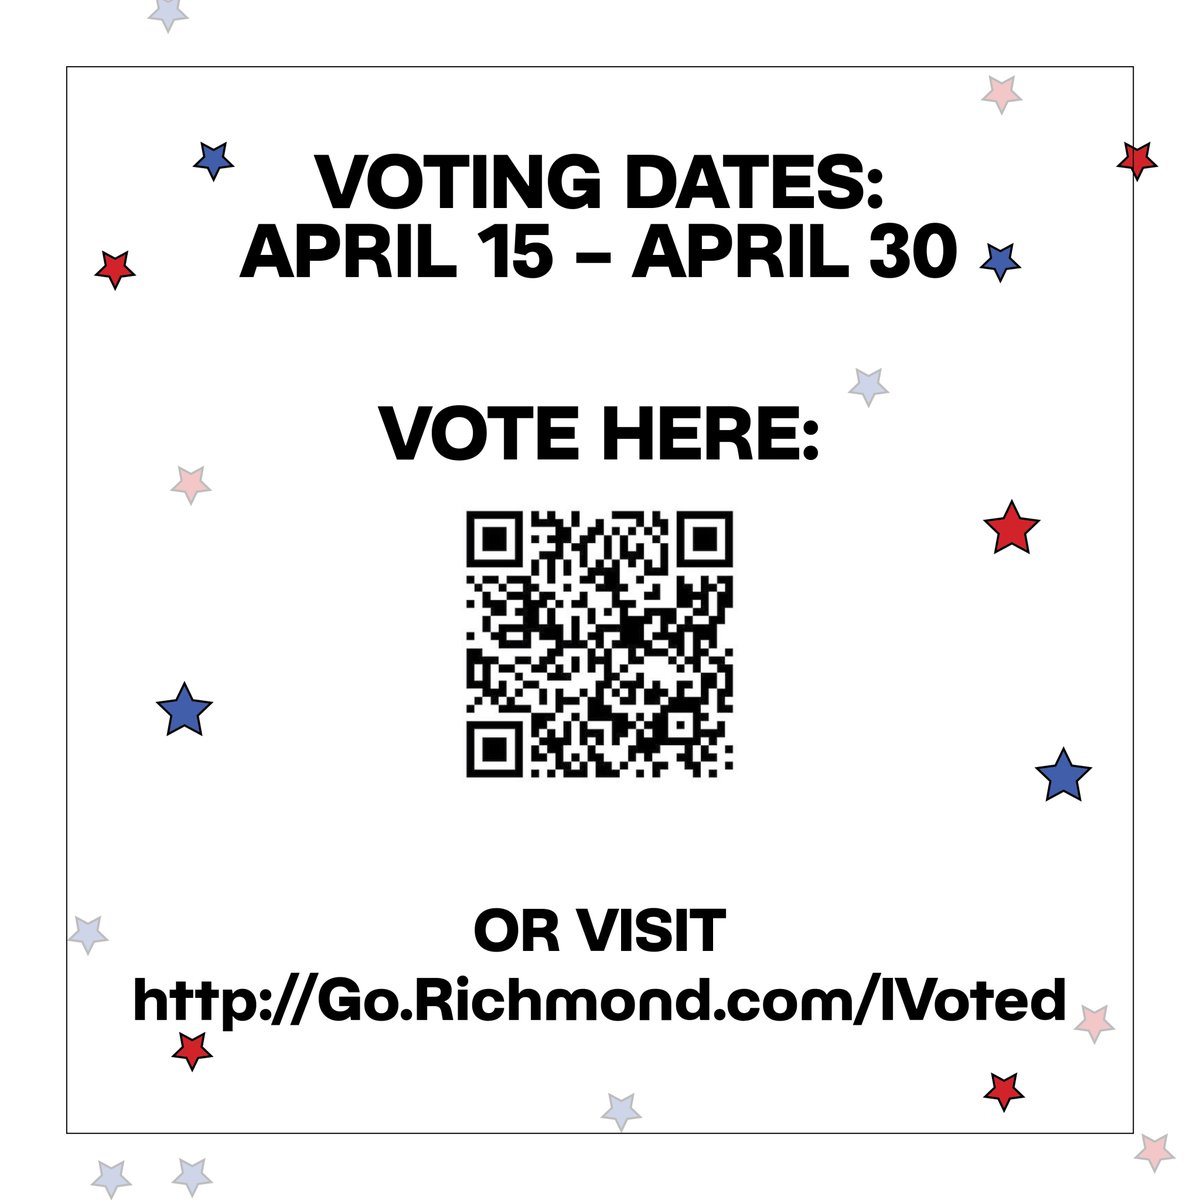 FINALLY ITS TIME TO VOTE FOR YOUR FAVORITE STICKER DESIGN. Visit Go.Richmond.com/IVoted or scan the QR Code in the second slide to cast your vote! Remember, the sticker that gets the most votes will be the sticker used in all 72 polling locations in the November election.